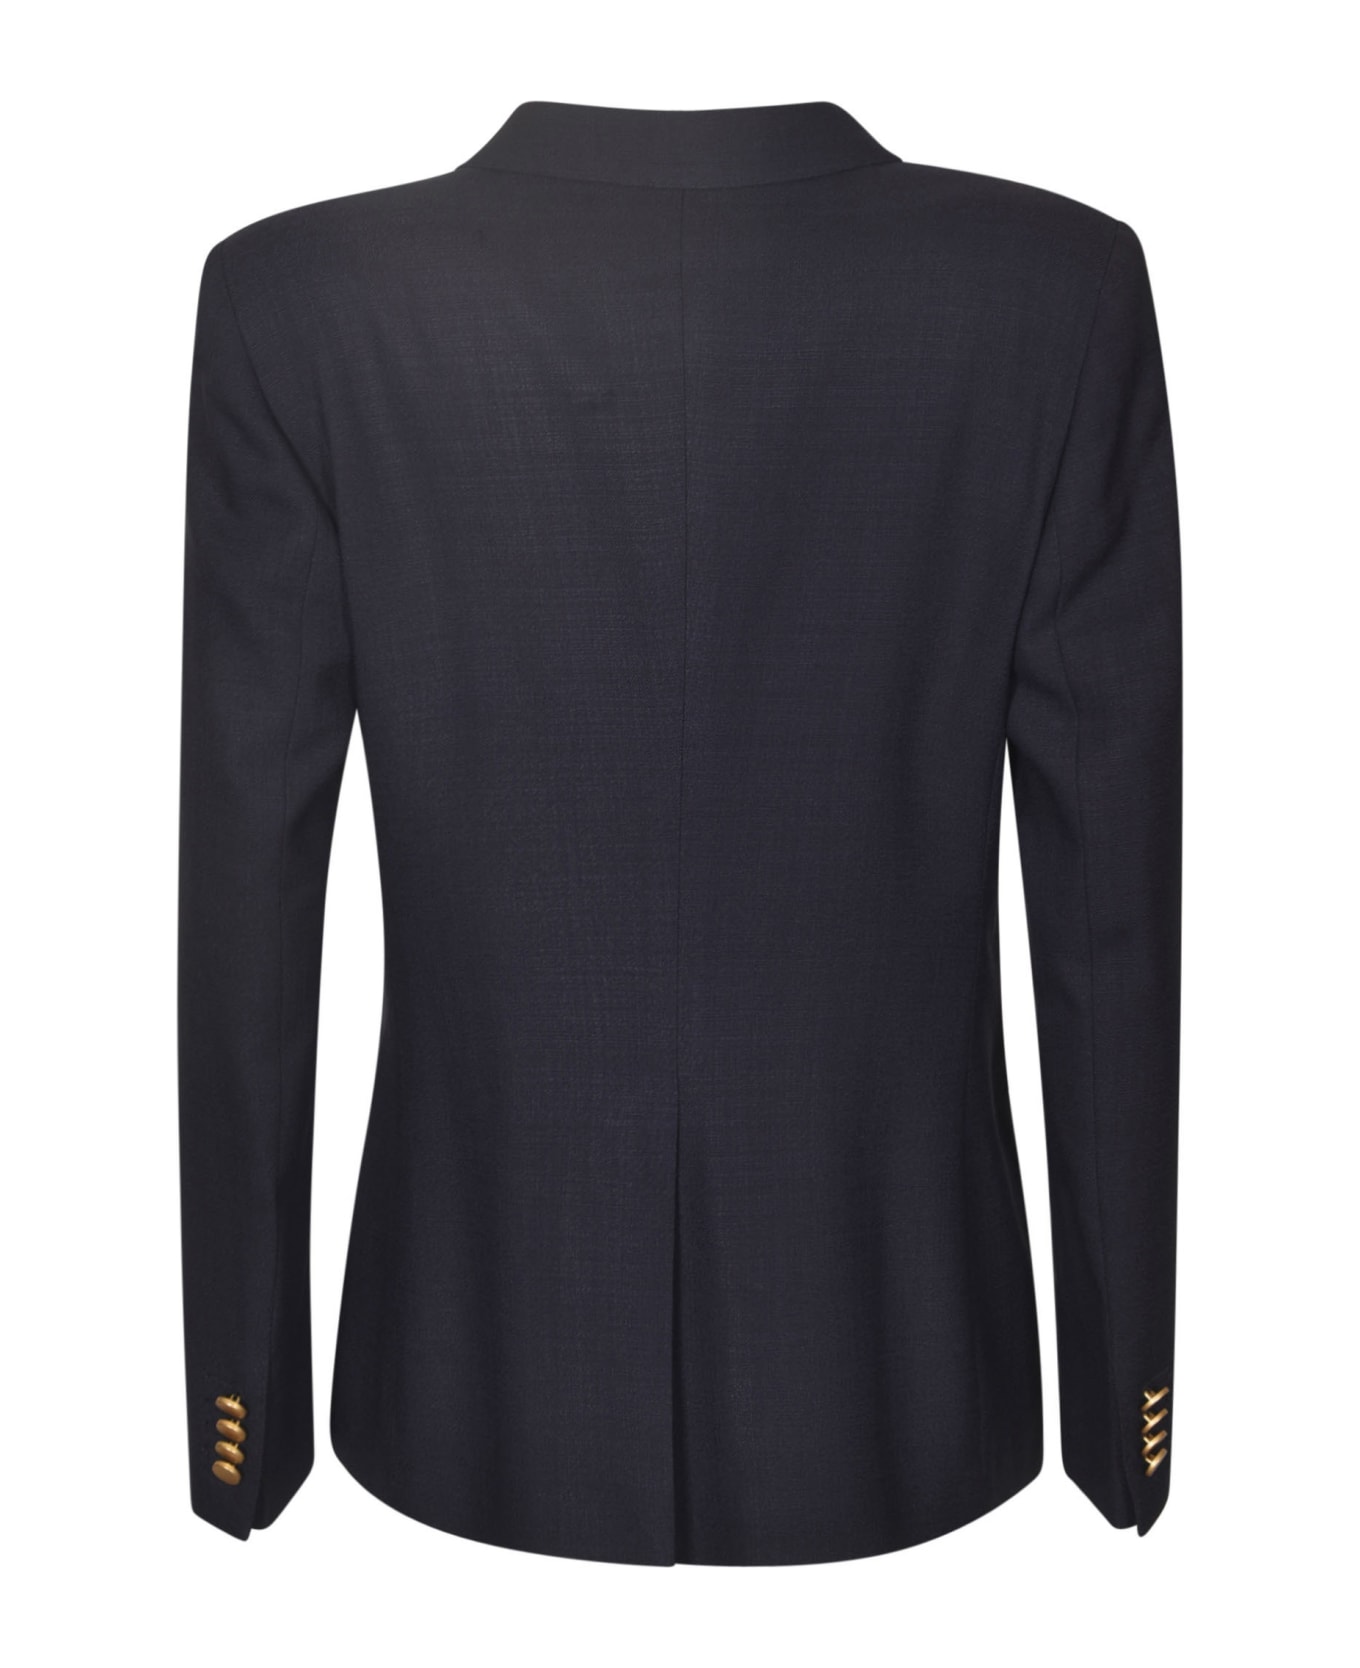 Tagliatore Double-breasted Fitted Blazer - Blue